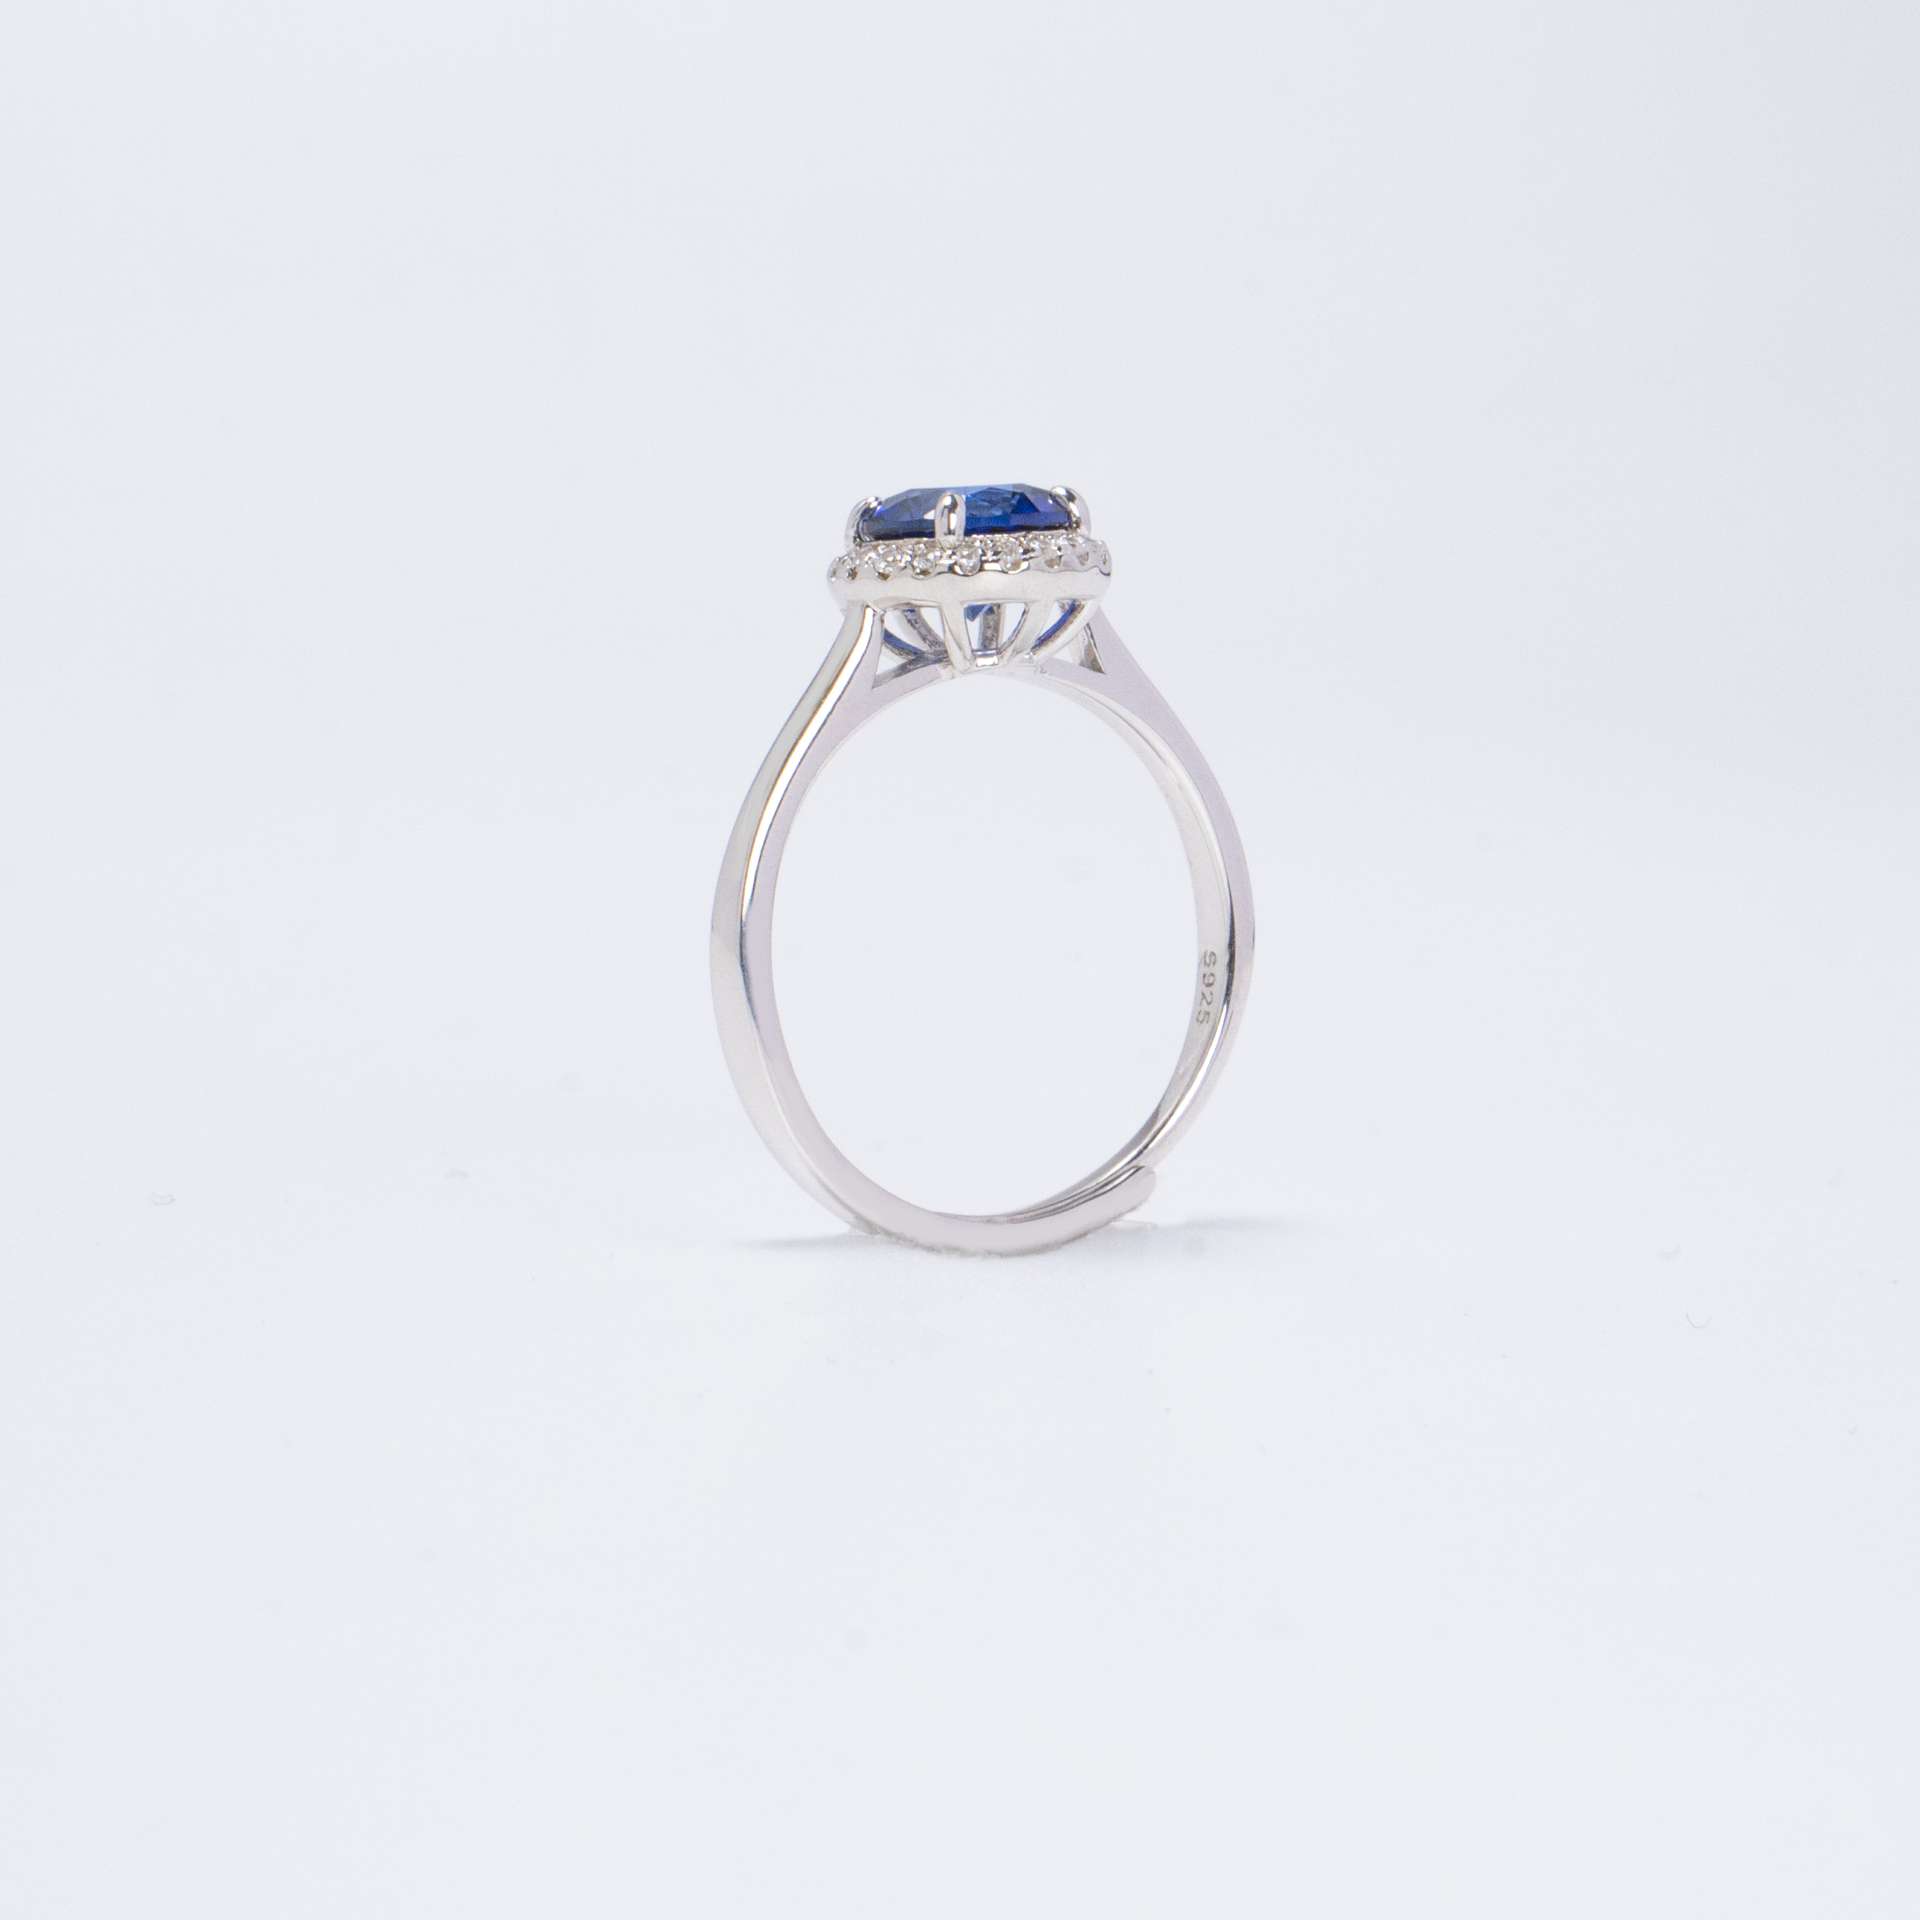 1CT Synthetic Sapphire Round Brilliant Cut Ring